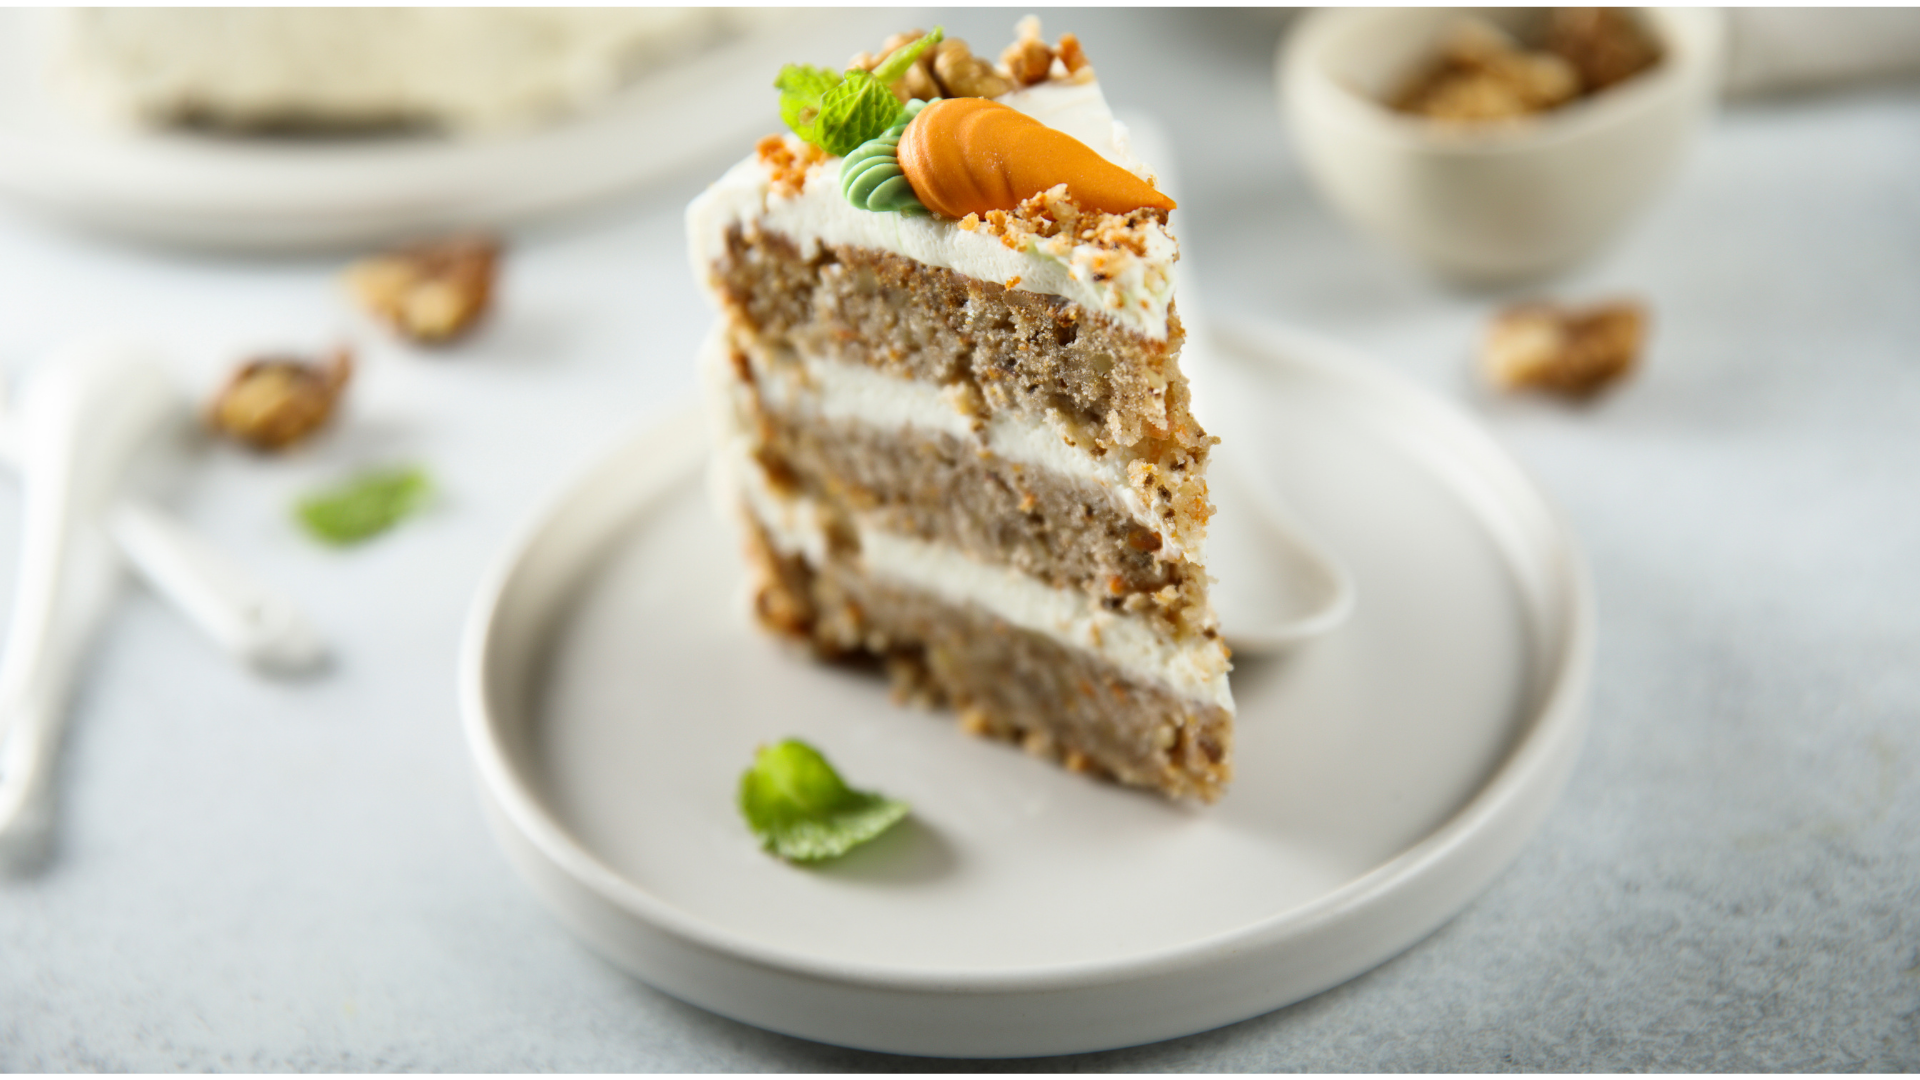 Simple Carrot Cake with cream cheese frosting - Marcellina In Cucina